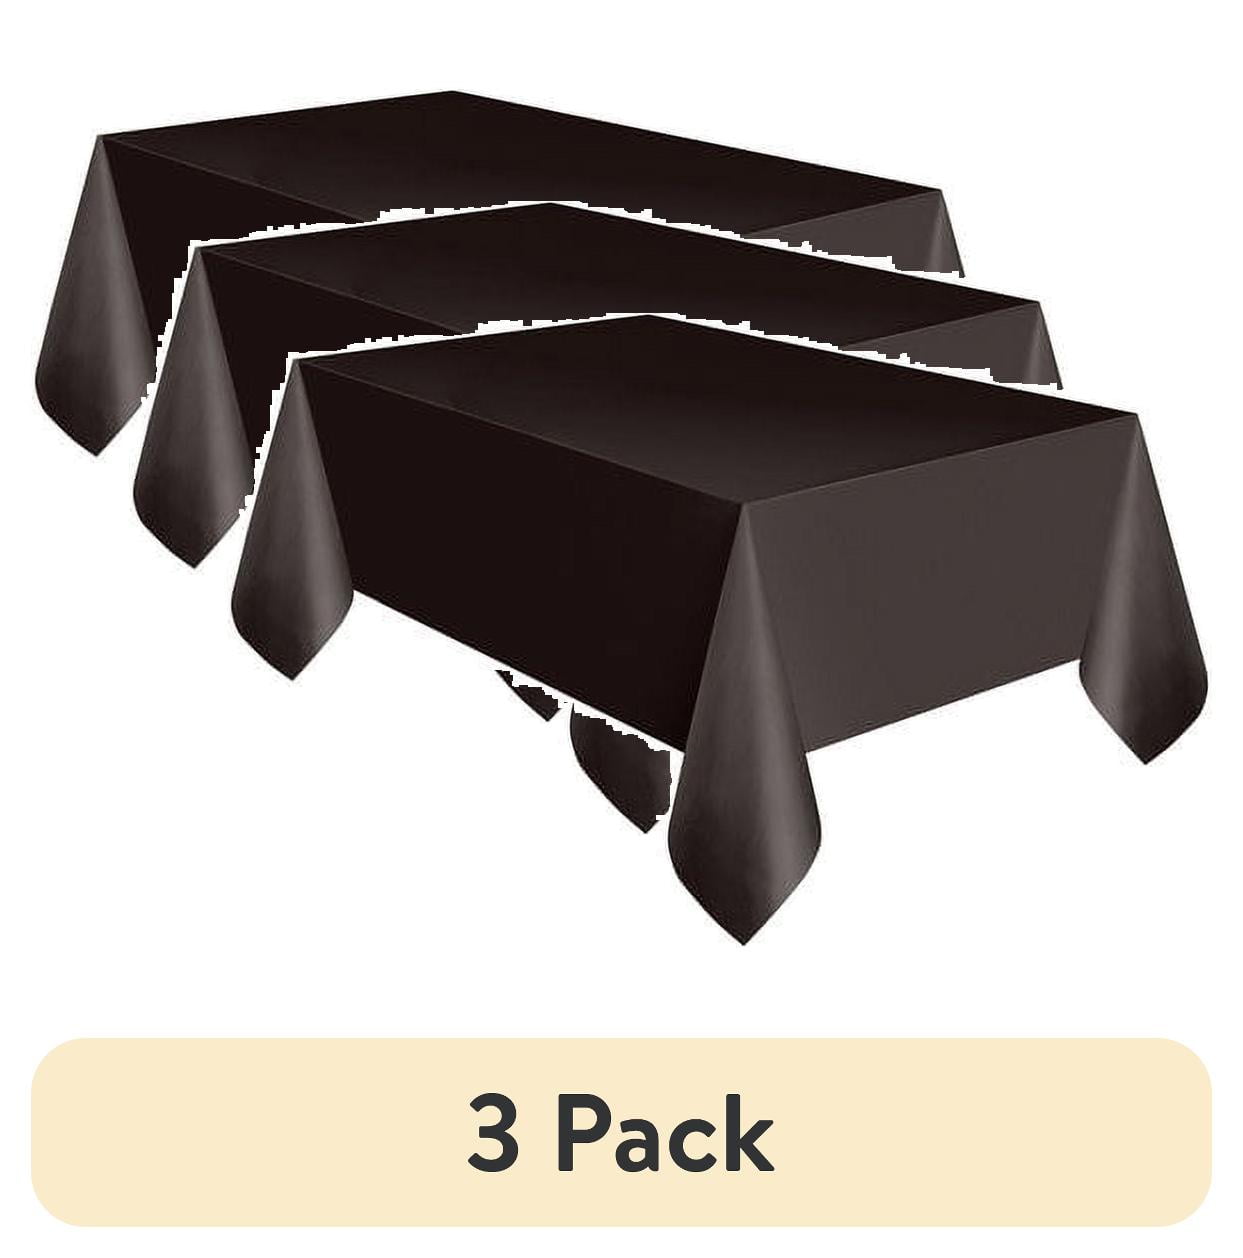 Black Plastic Party Tablecloths 108 X 54in 3ct Way To Celebrate 2e6a733d 2195 4aa3 A1fd 3728ca887285.cbd94dee738d722167f836b42c489abc 